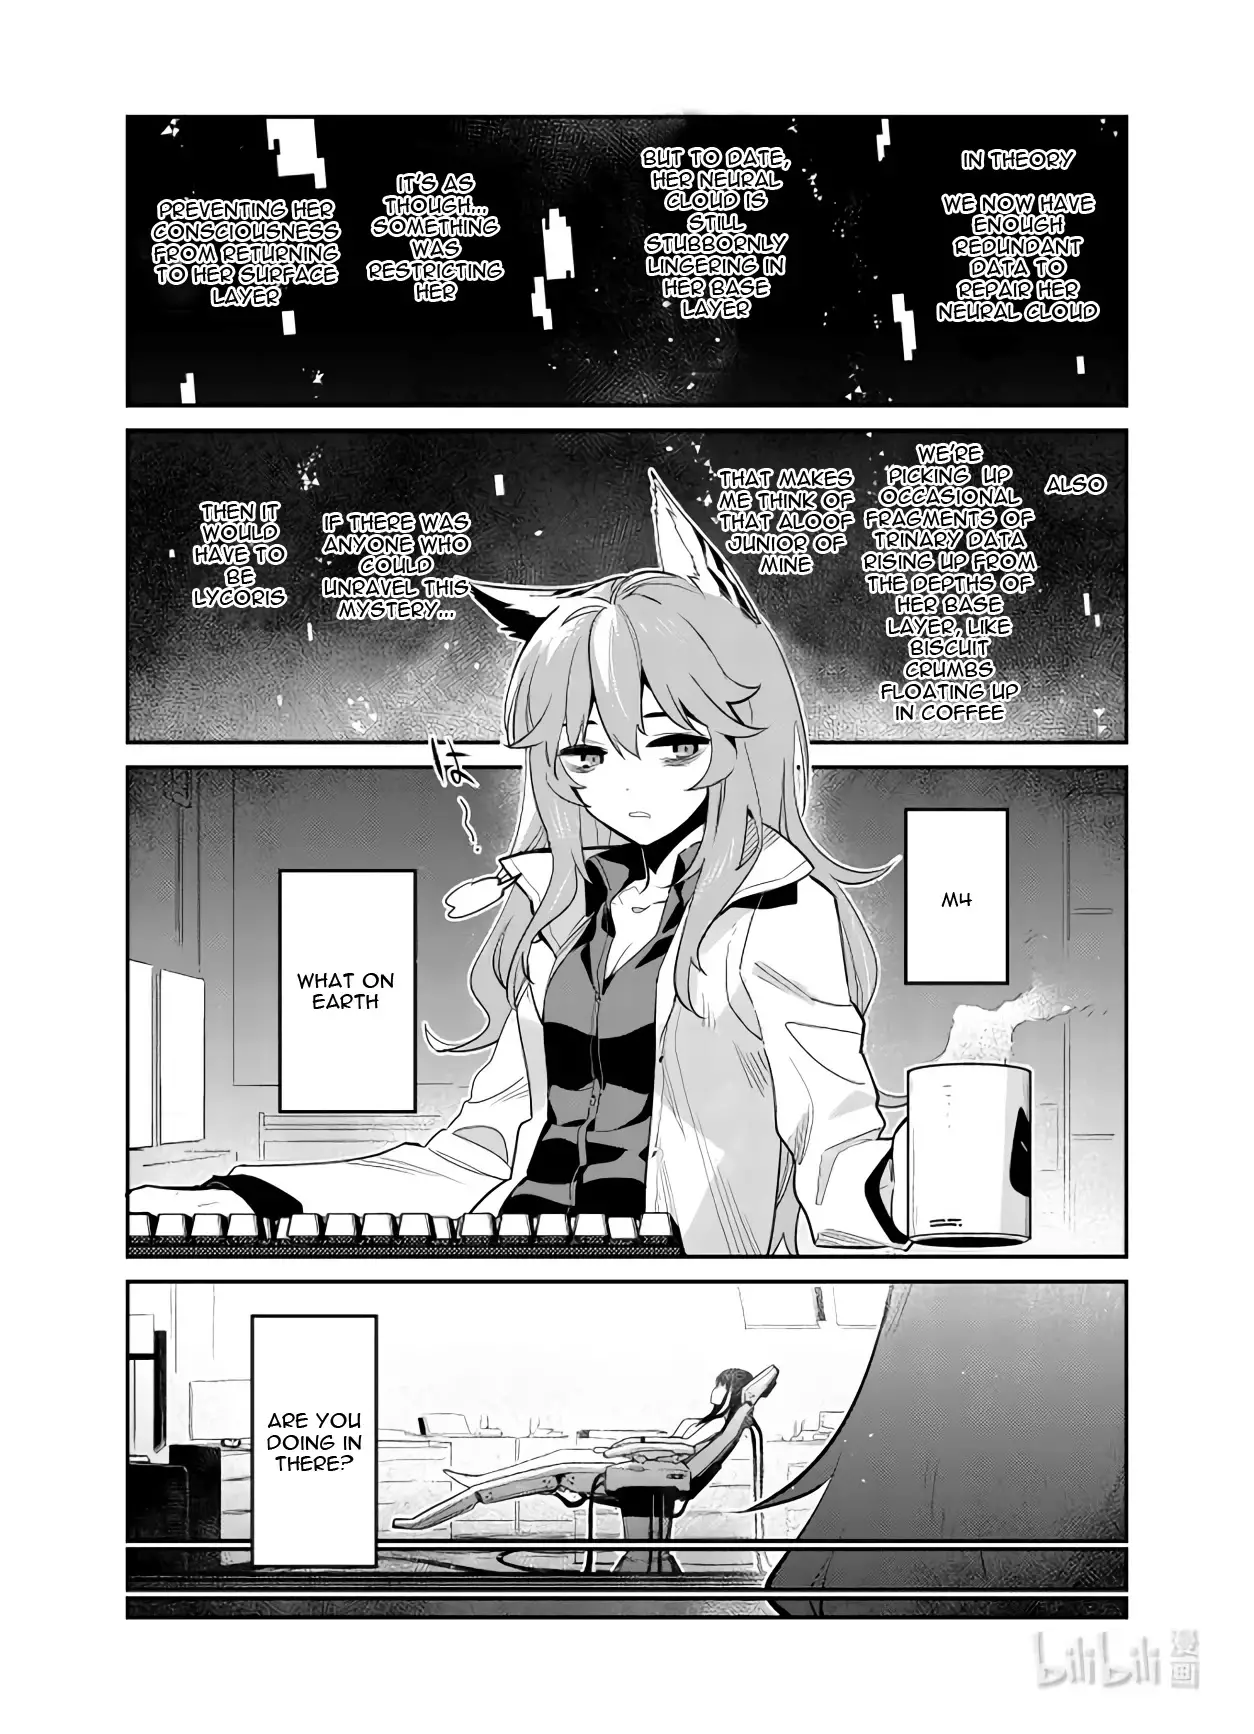 Girls' Frontline - 29 page 6-e2d9b7bf